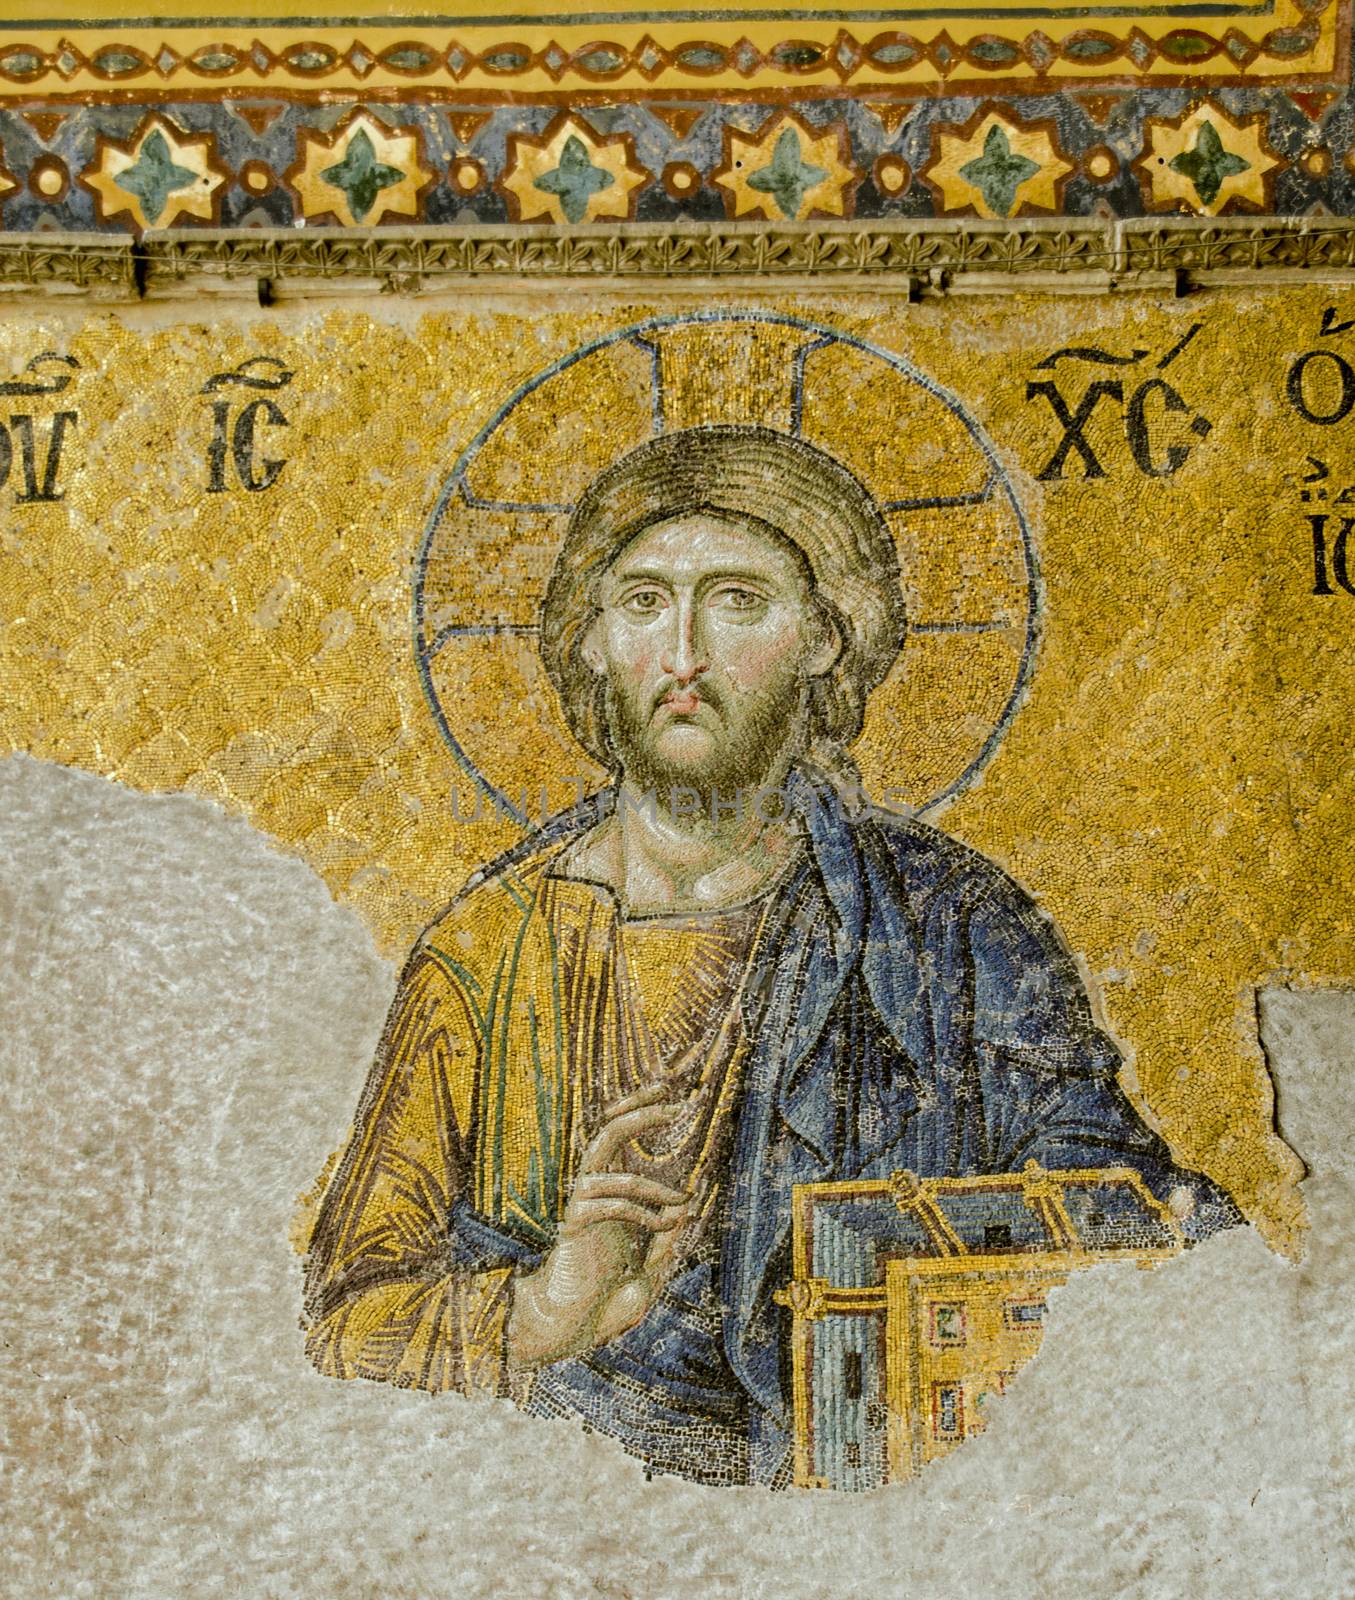 A 13th century Byzantine mosaic of Jesus Christ at the Hagia Sophia, Istanbul.  